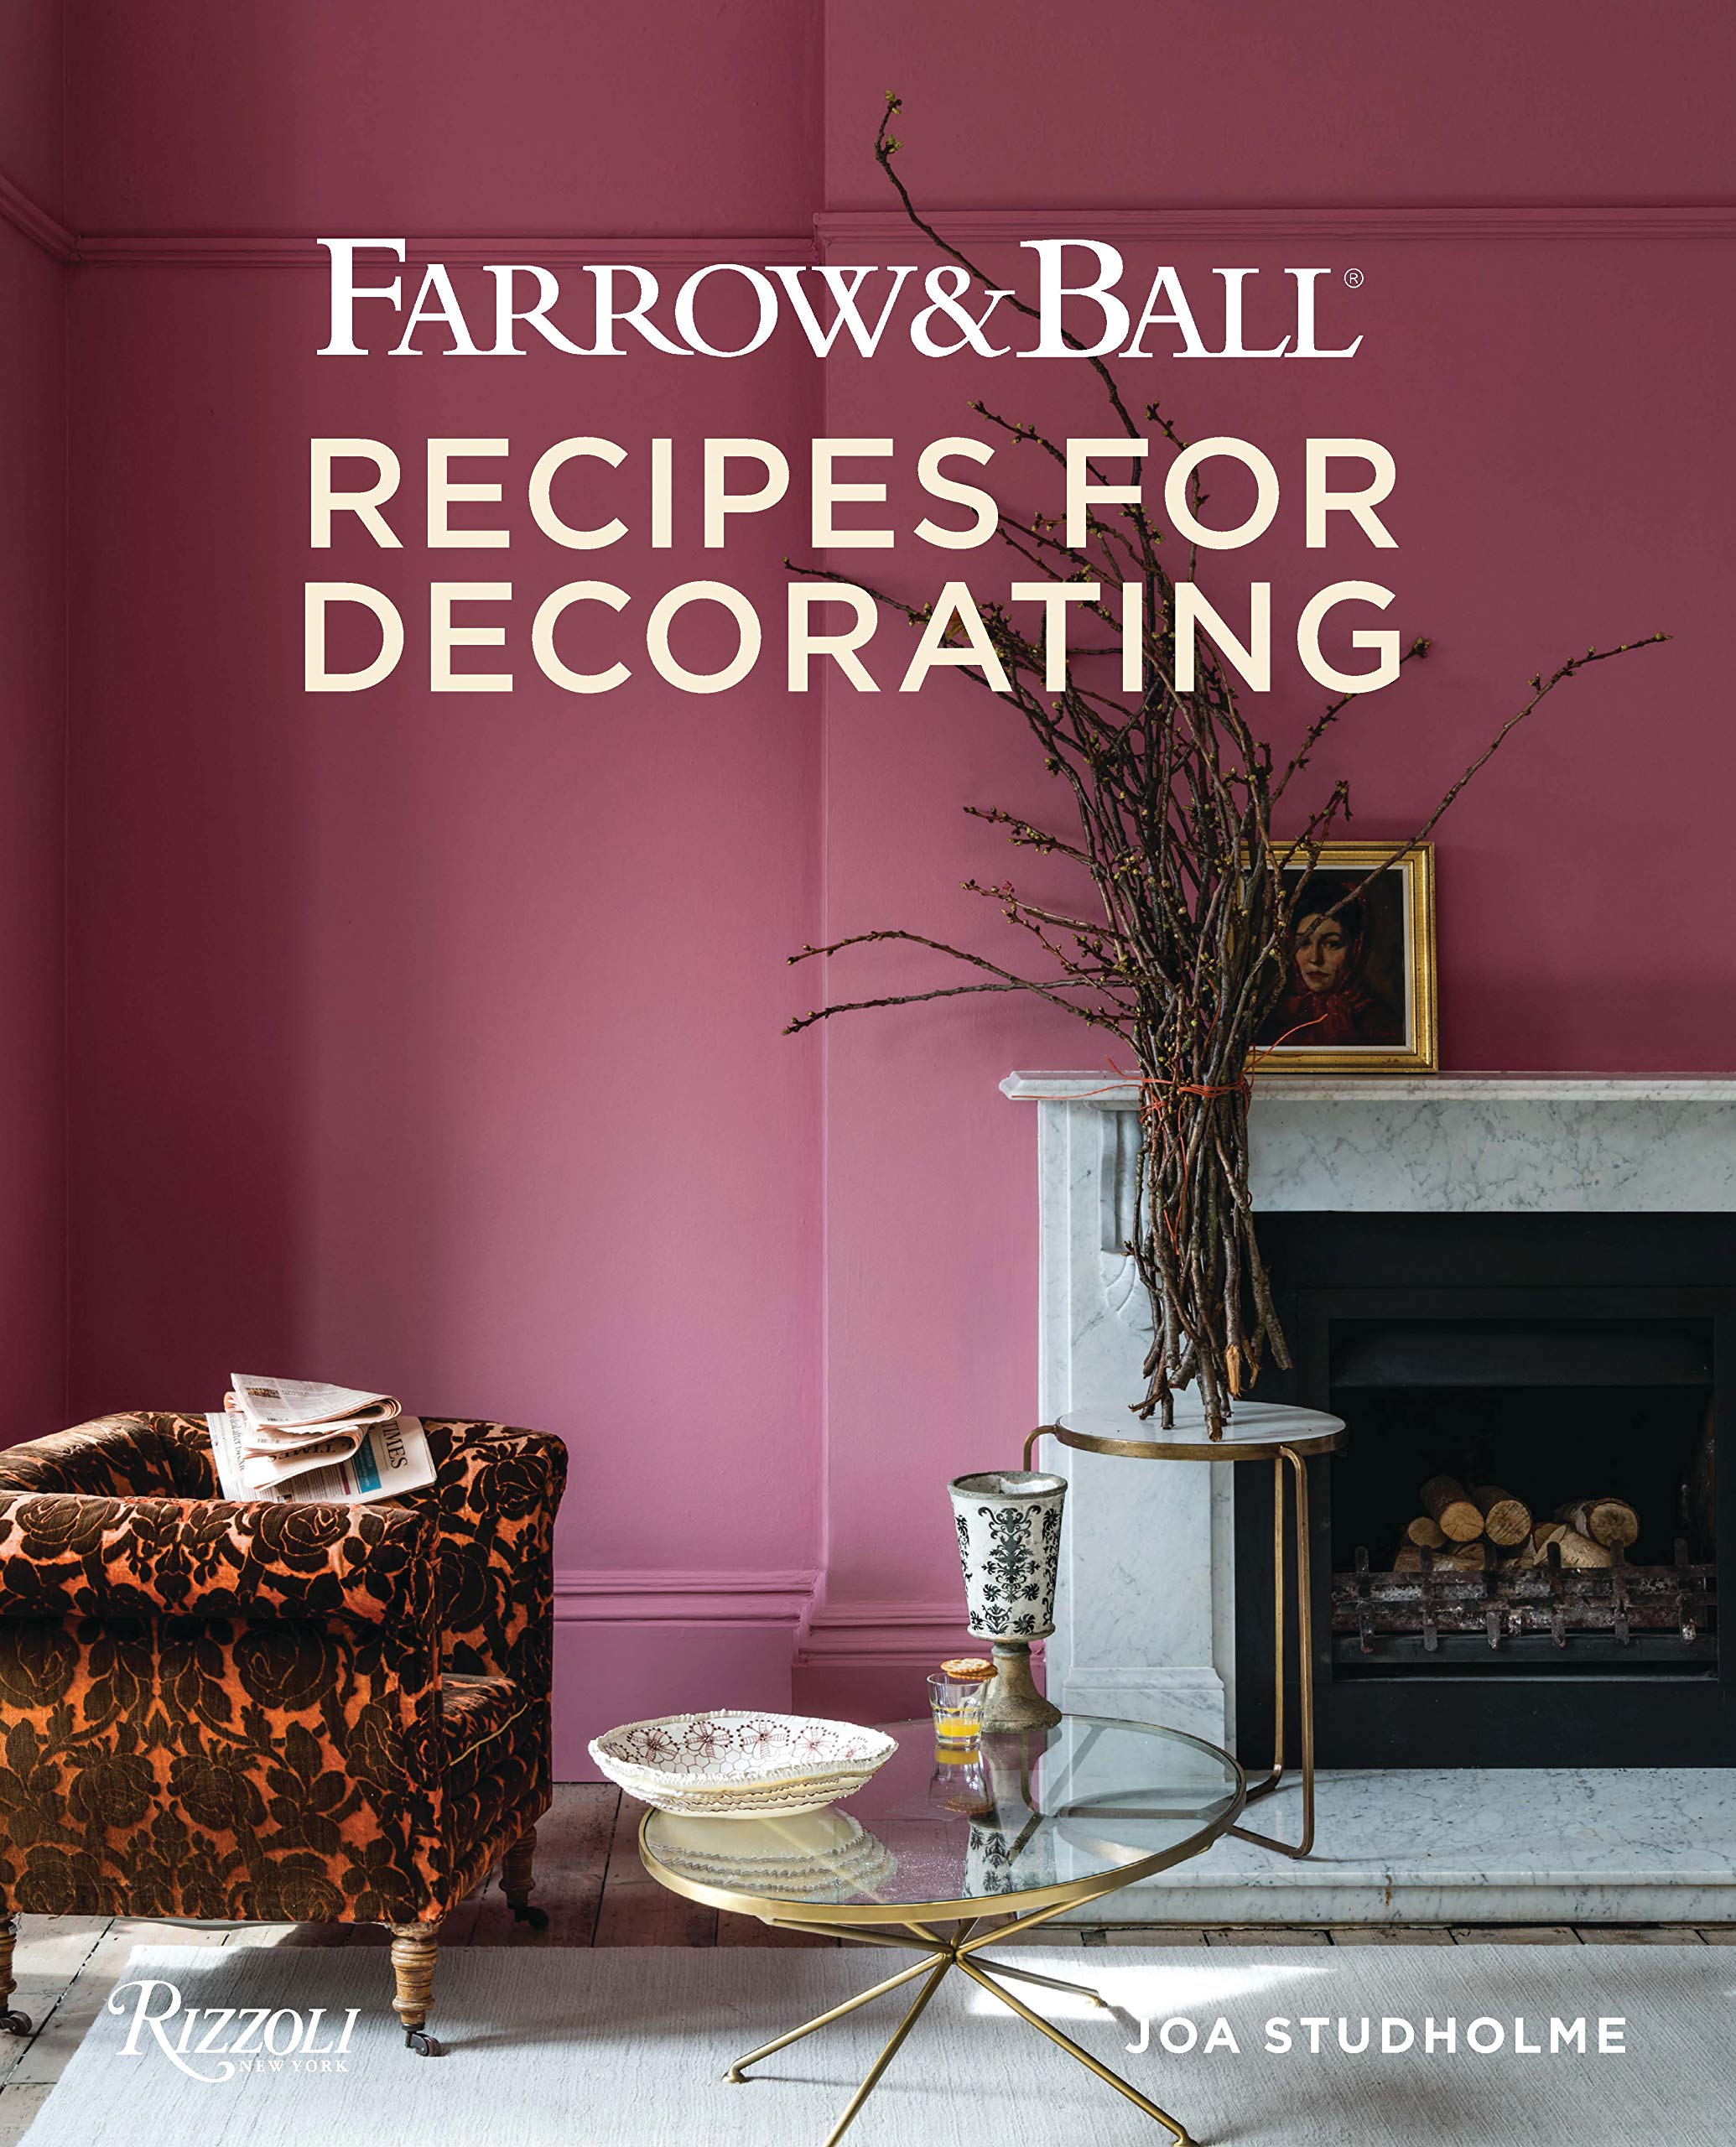 Recipes for Decorating